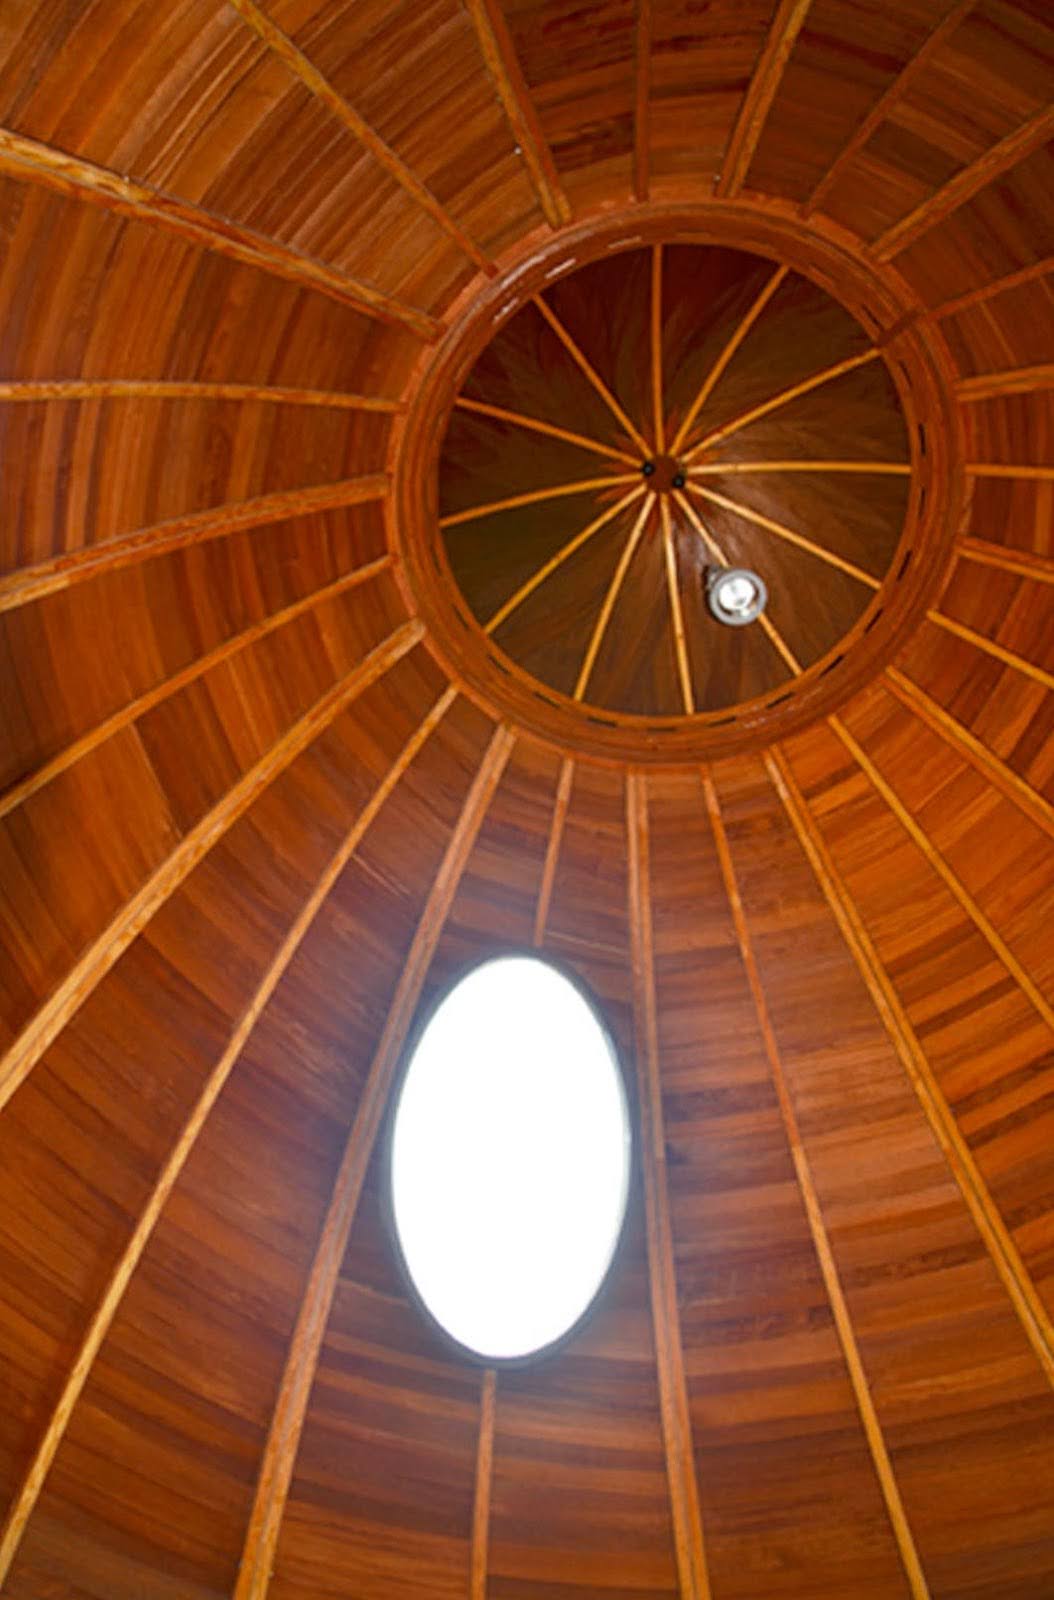 An oval wooden roof with an oval window cut out from it